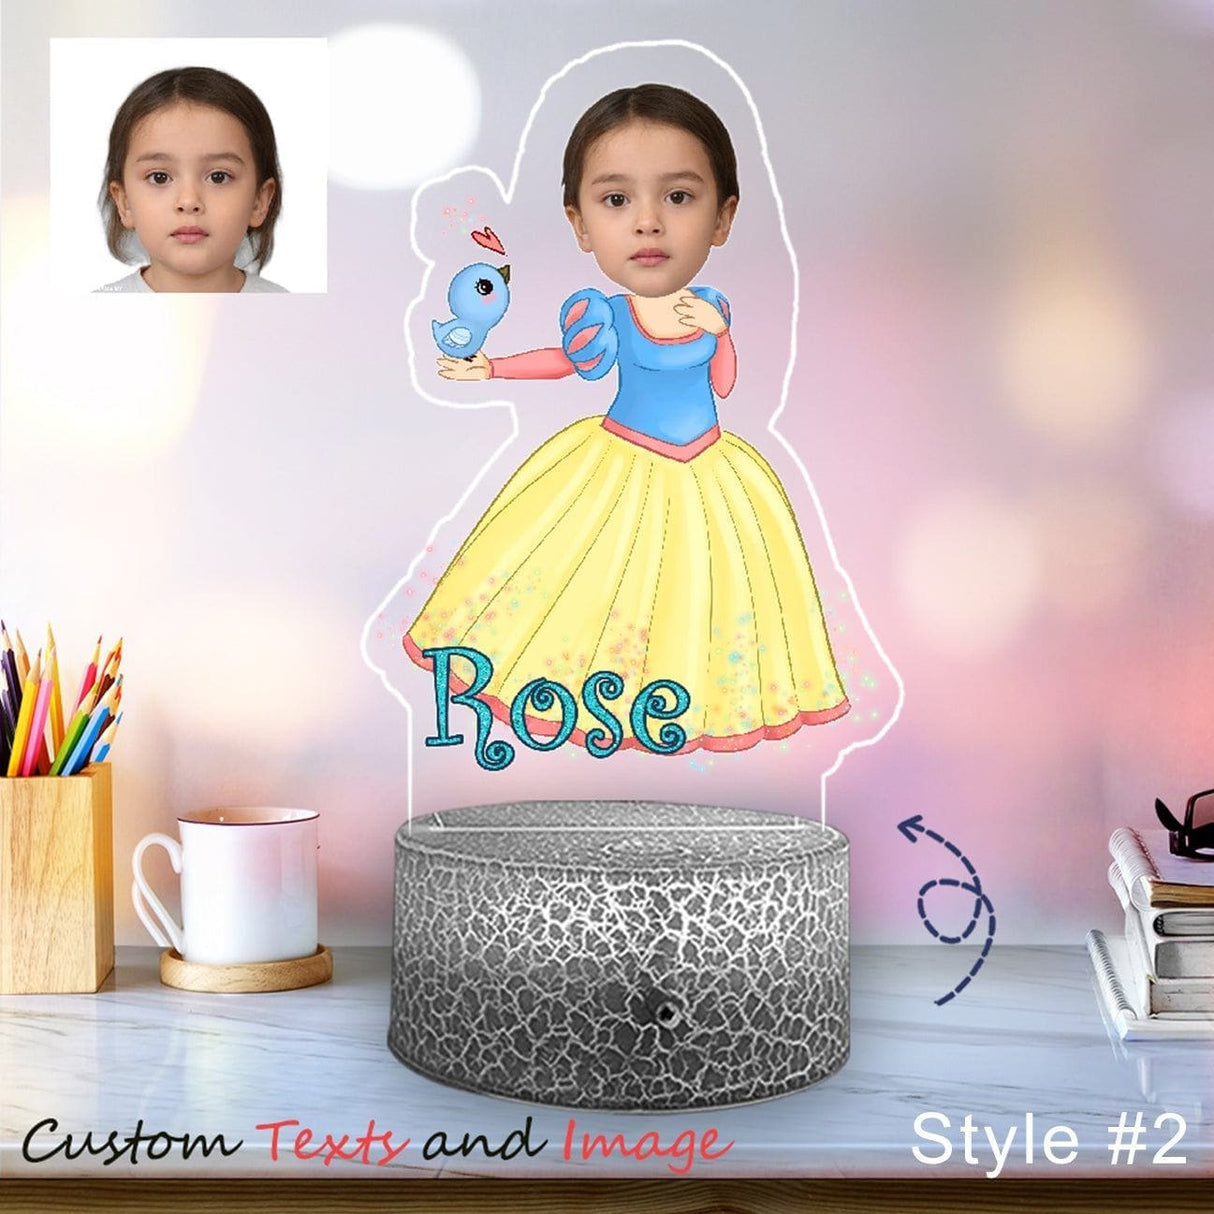 Personalized Snow White Night Lights - Snow White Nightlight Acrylic Table LED Lamp For Kids, Teens Gifts